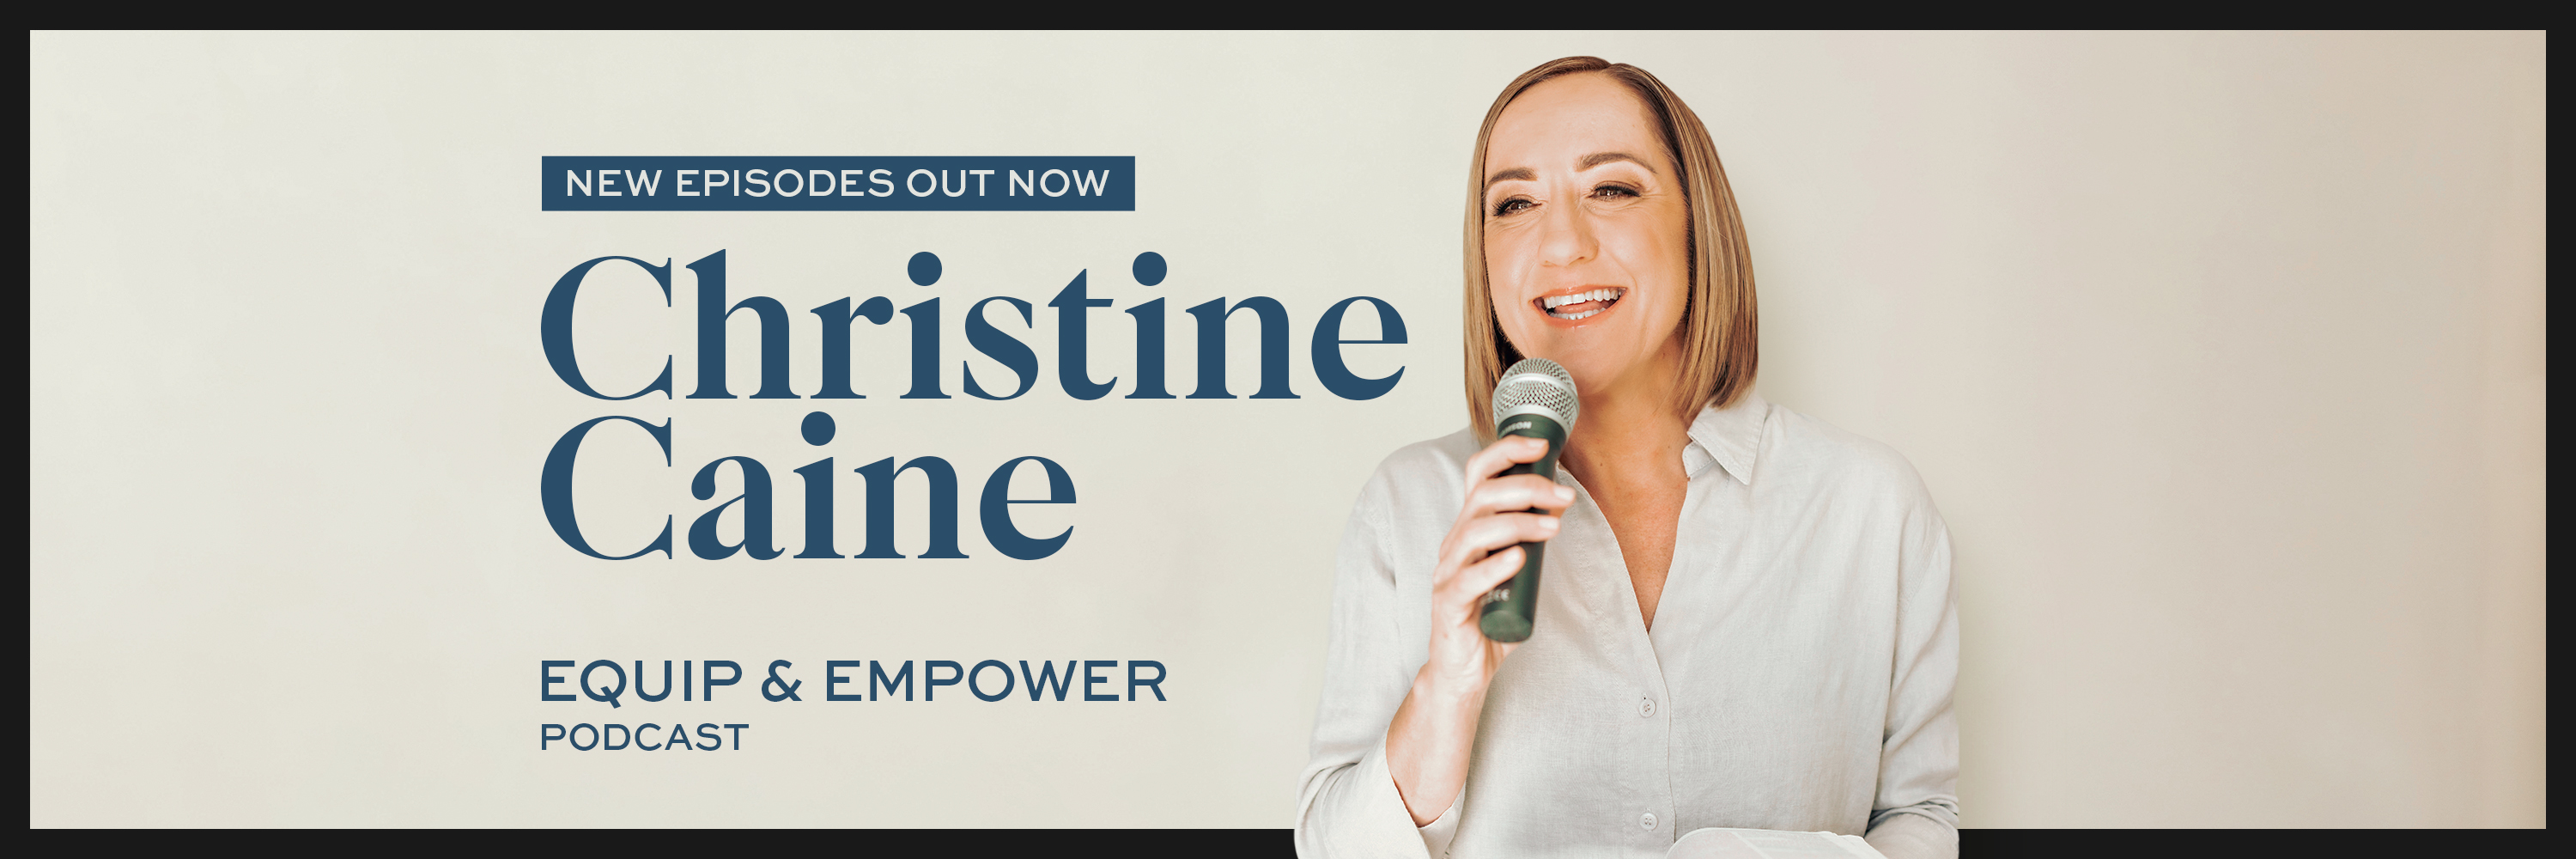 Christine Caine Equip and Empower 2.0